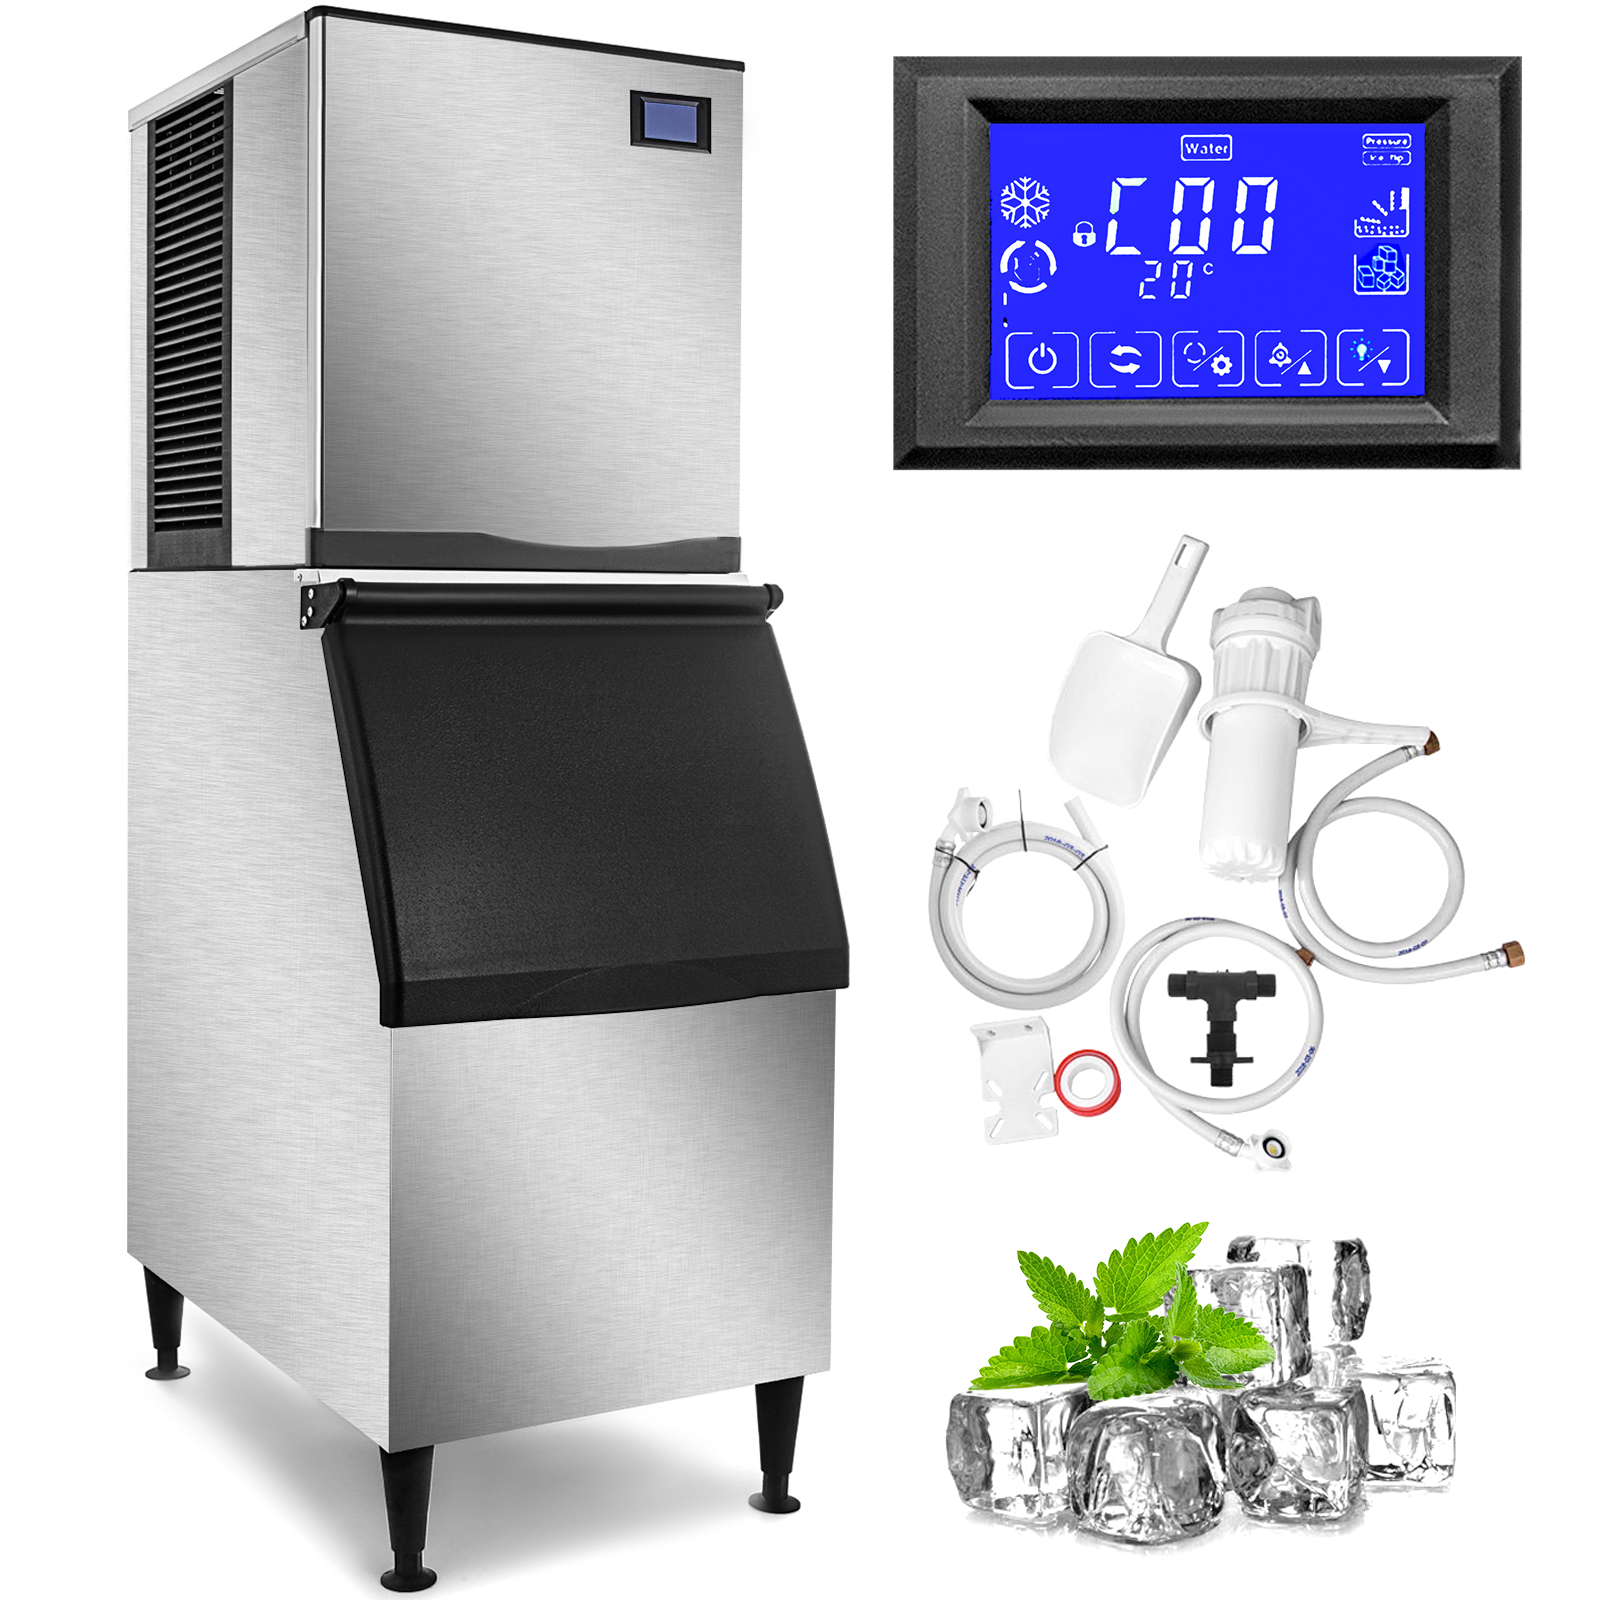 https://d2qc09rl1gfuof.cloudfront.net/product/ZBJLB-400T-ZH0001/commercial-ice-maker-m100-1.2.jpg